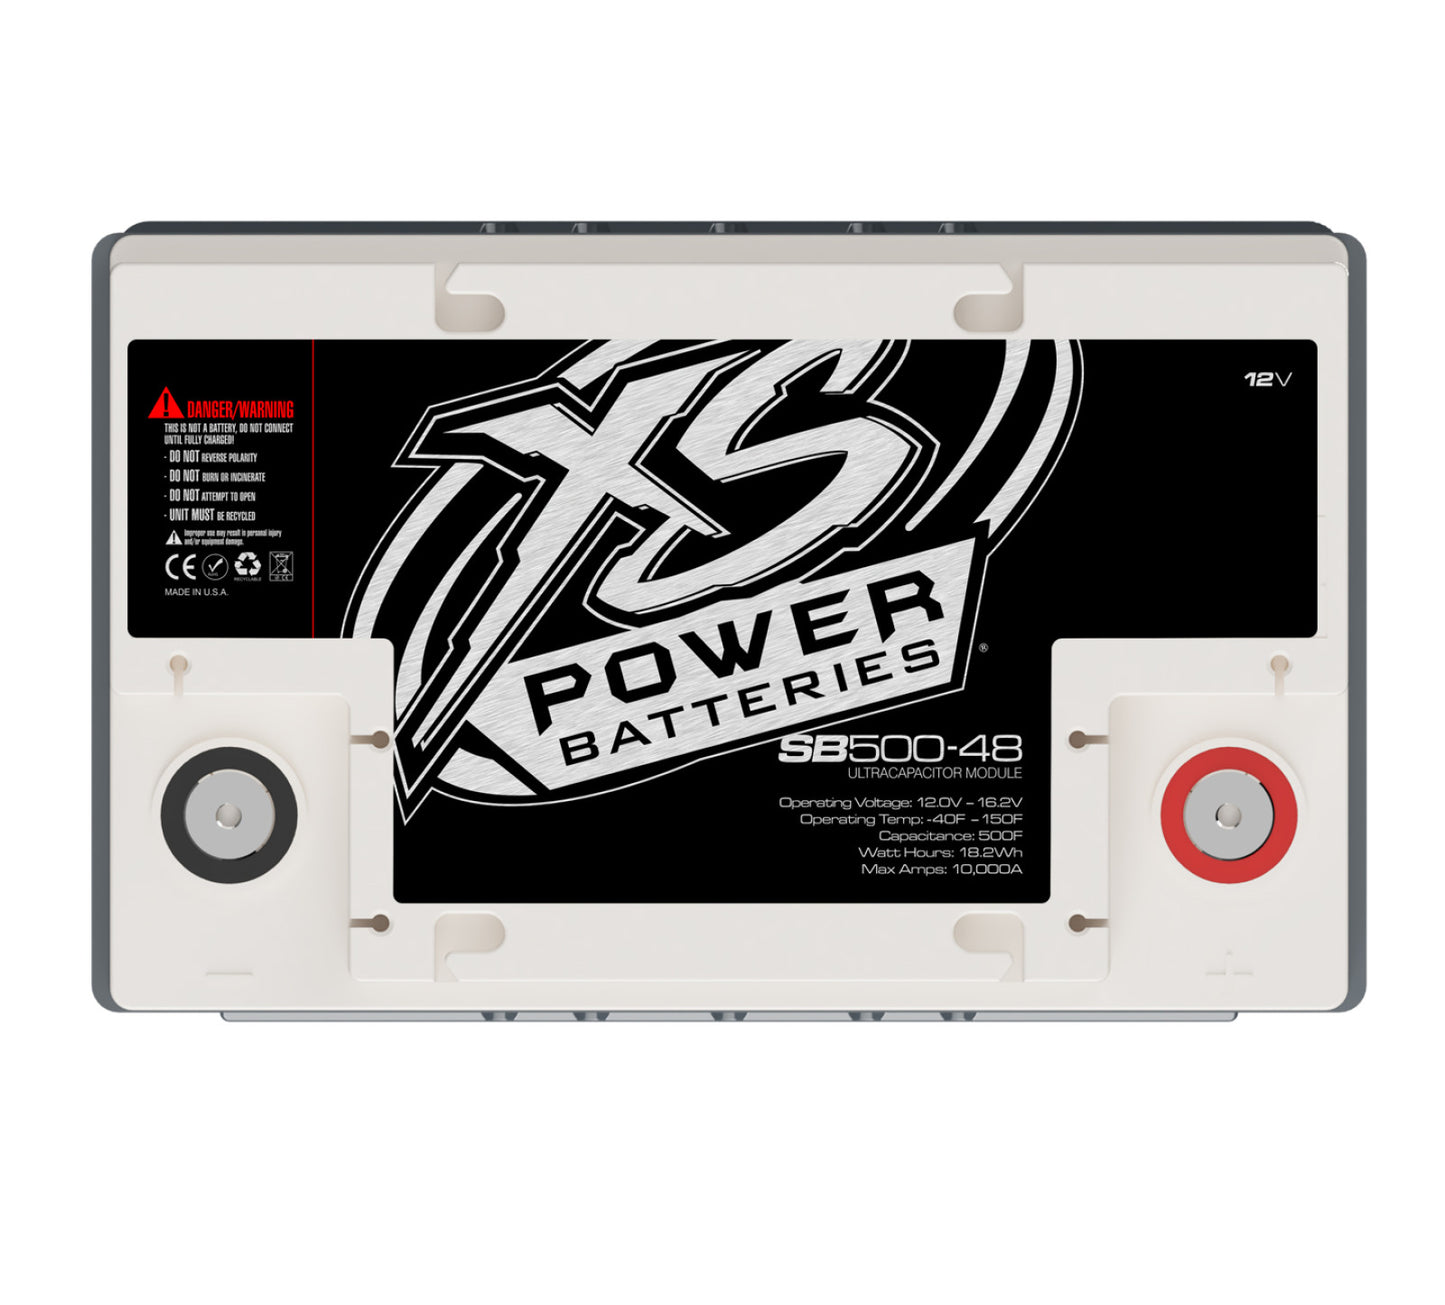 XS Power Batteries 12V Super Bank Capacitor Modules - M6 Terminal Bolts Included  10000 Max Amps